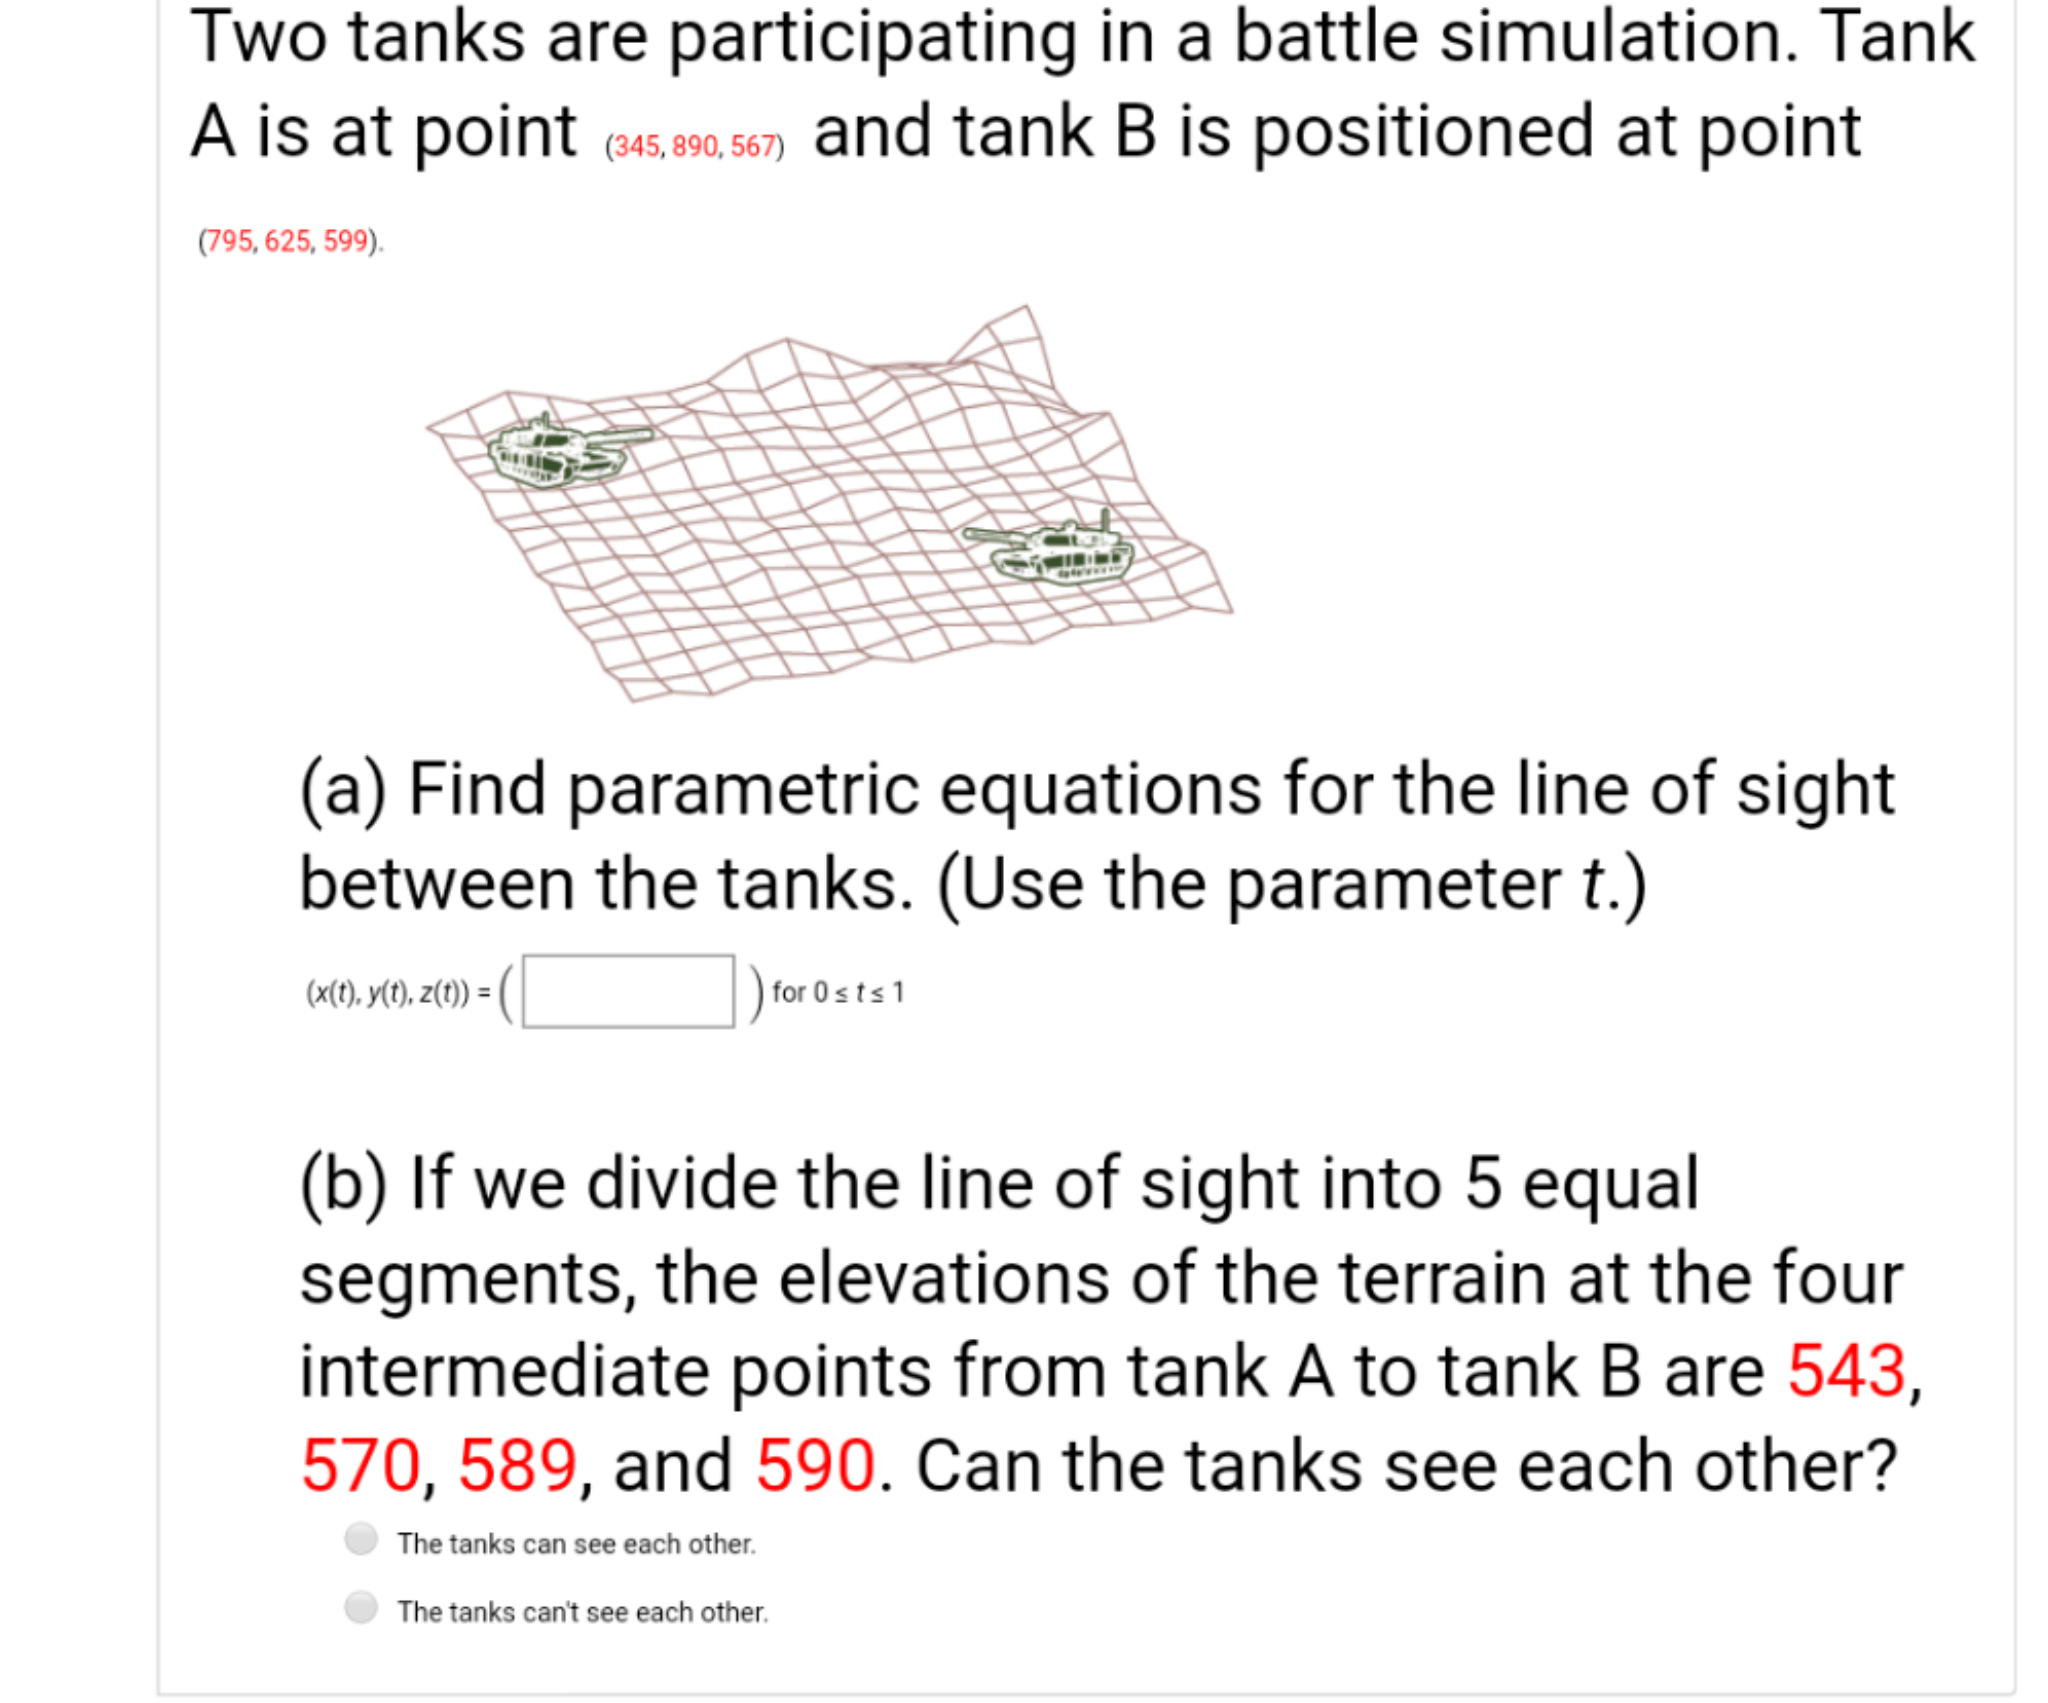 Two tanks are participating in a battle simulation. Tank
A is at point e845,890, 567) and tank B is positioned at point
(795, 625, 599).
